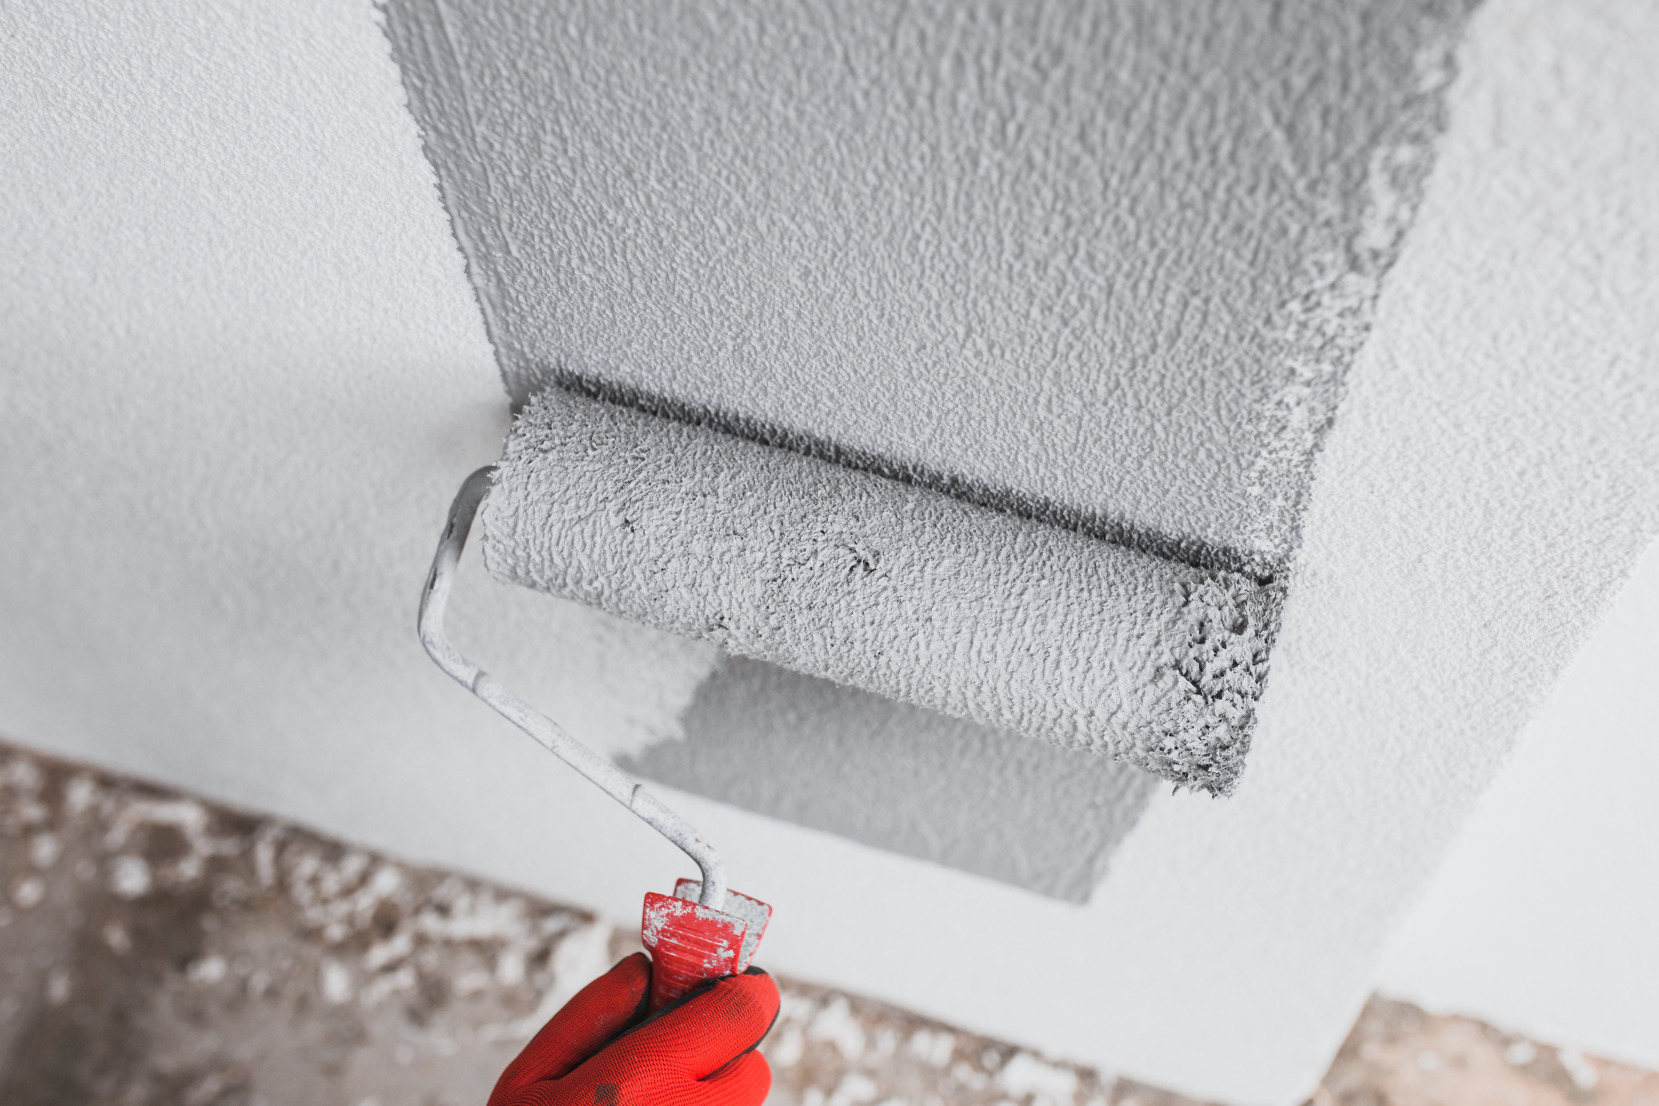 A contractor applies grey paint to an interior wall as part of building a house.